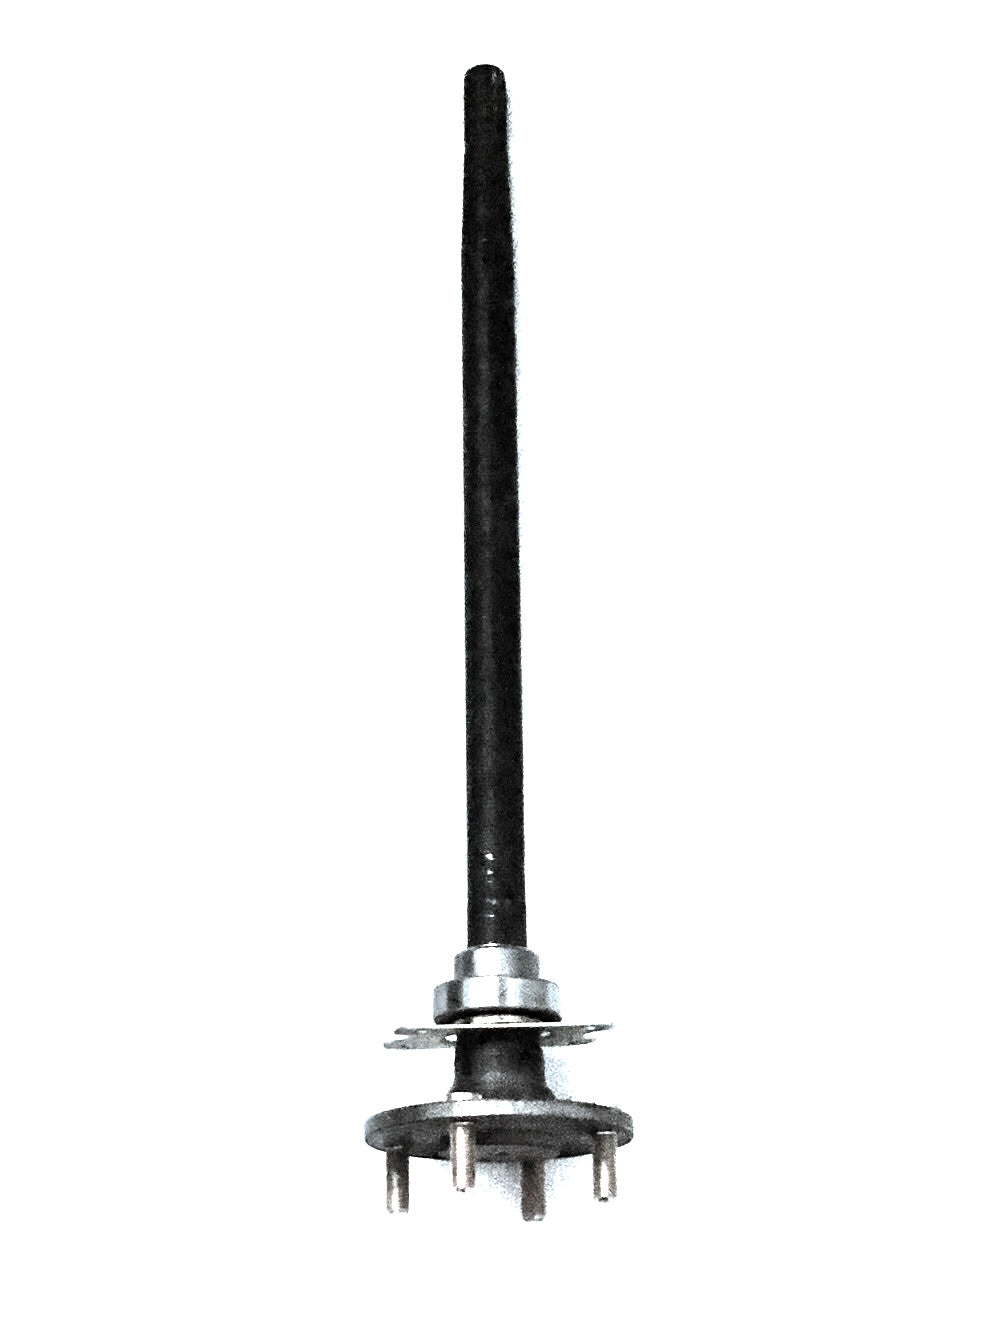 EMC AXLE SHAFT FOR RIGHT HAND SIDE AXLE OF EMC CLASSIC, EXPRESS, EXECUTIVE AND ELITE MODEL VEHICLES FOR MECHANICAL BRAKES